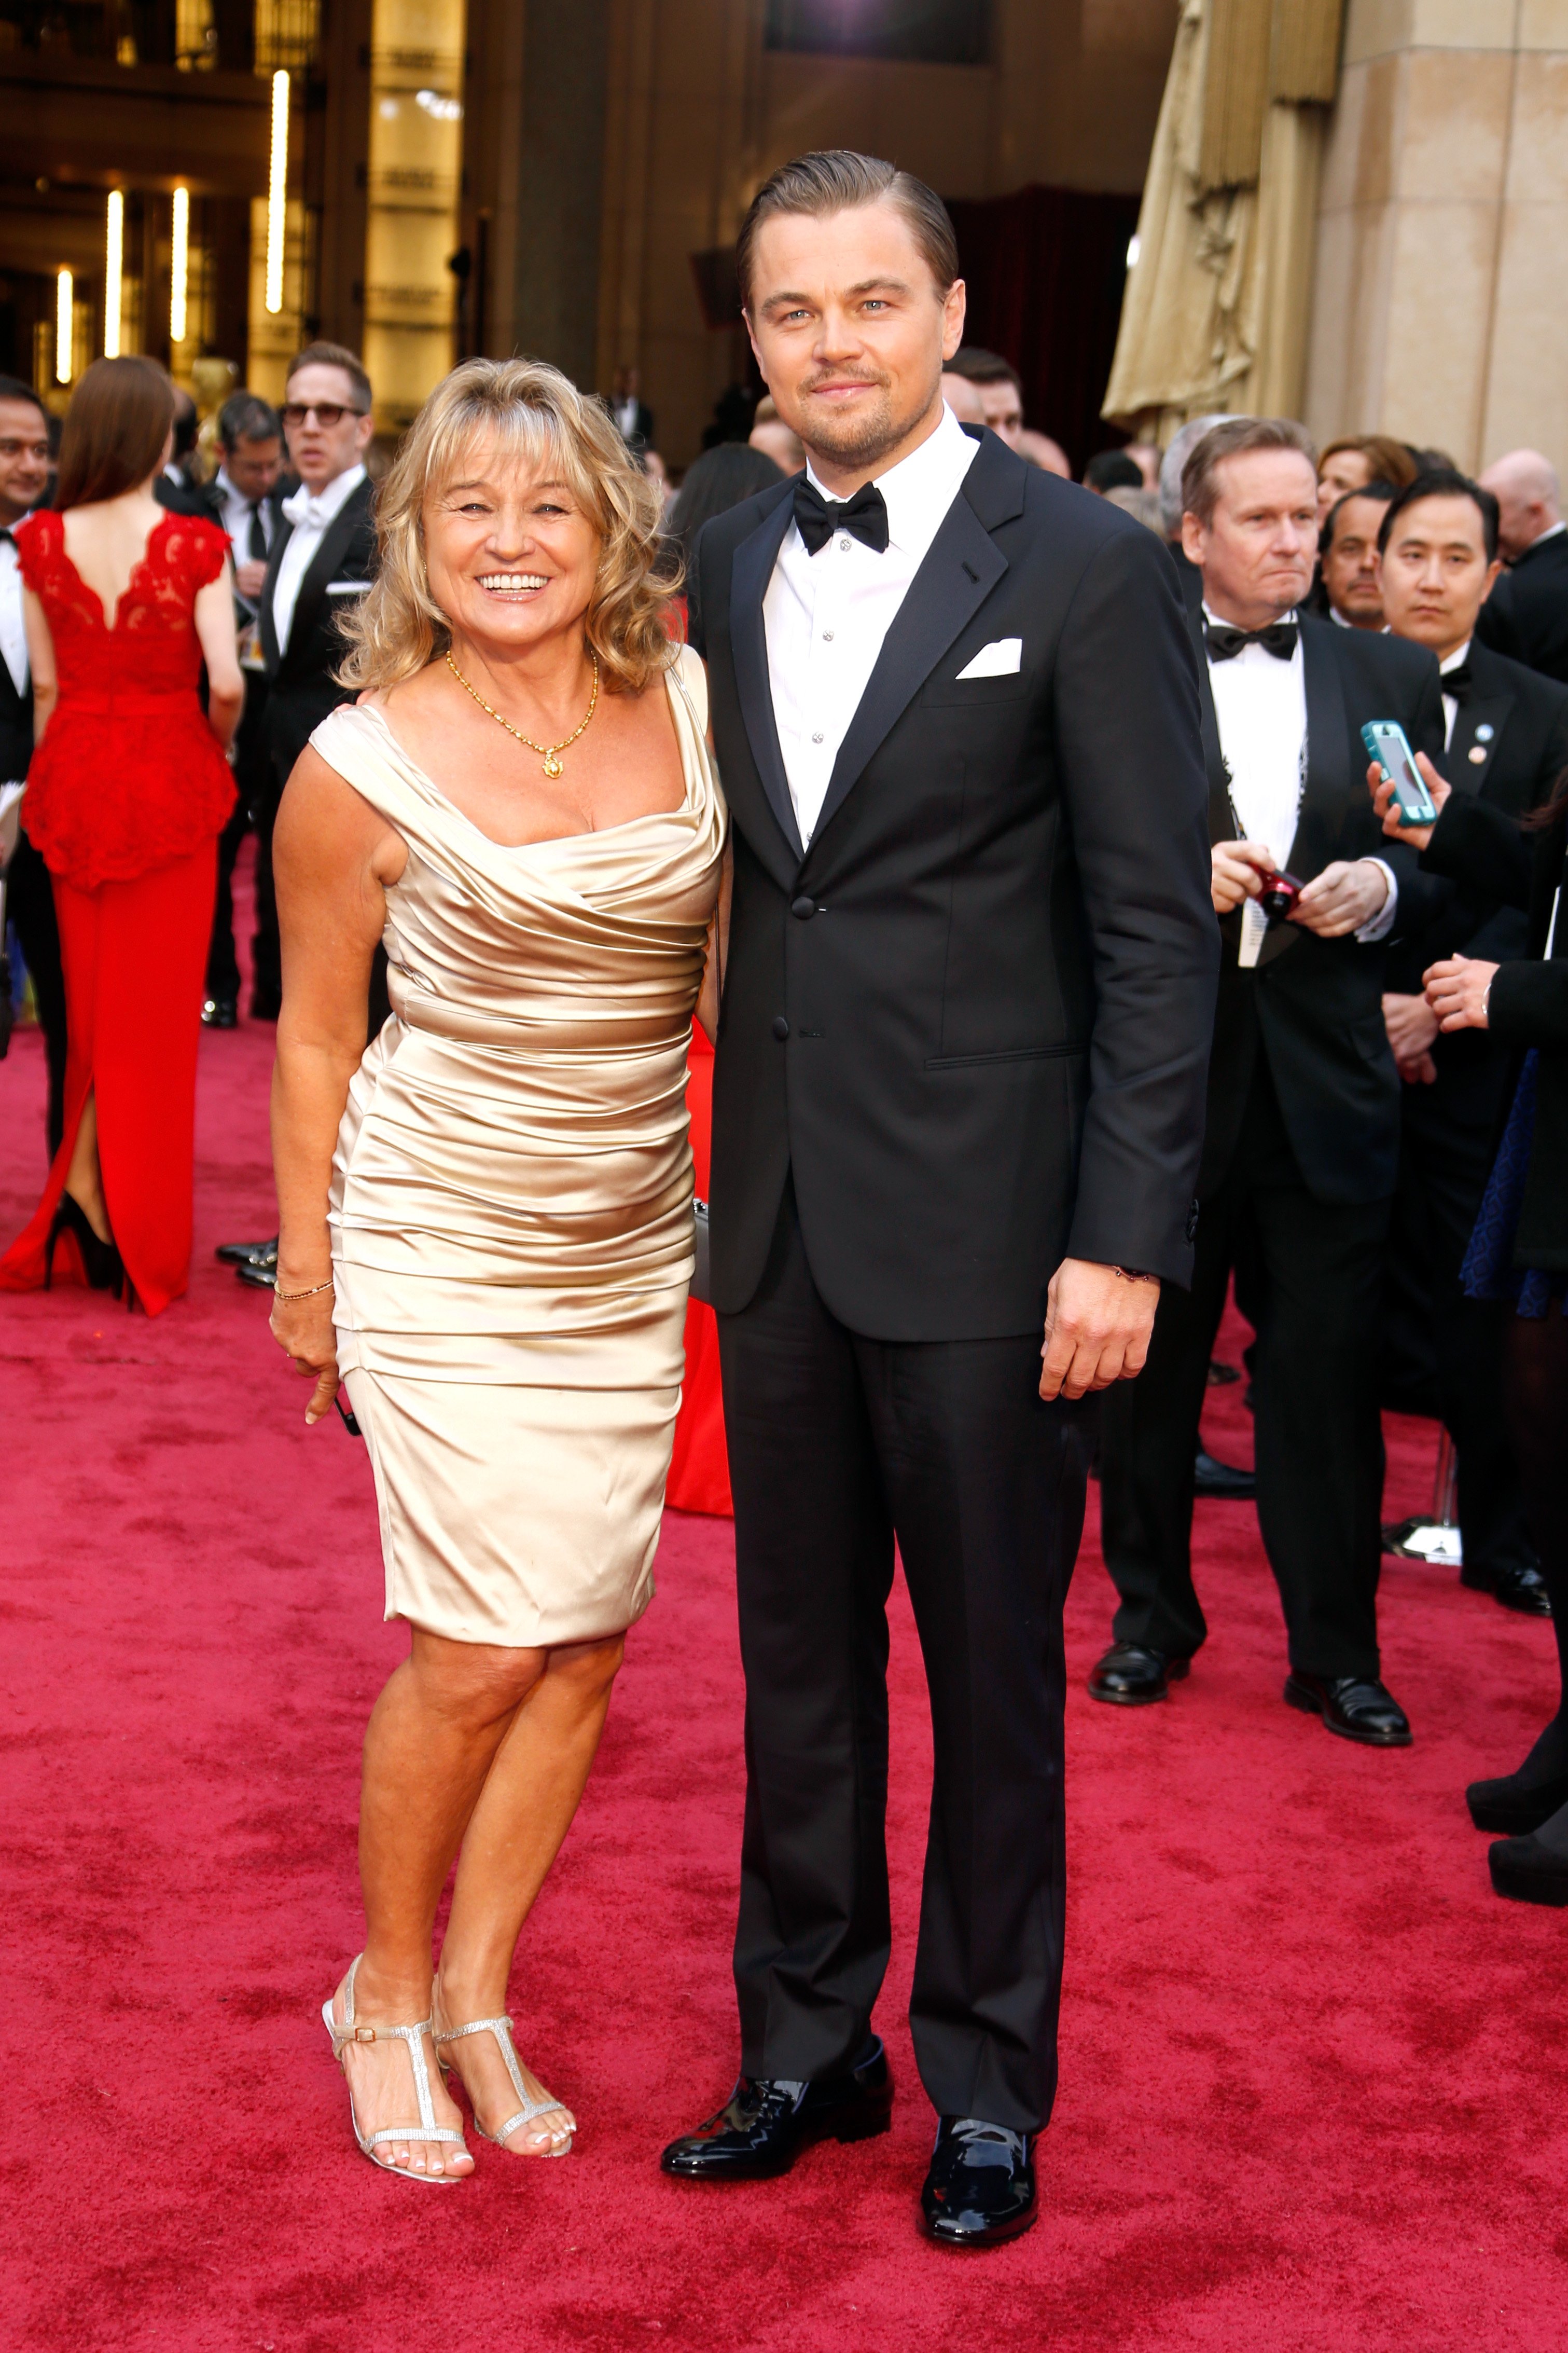 Irmelin Indenbirken and Leonardo DiCaprio attend the 86th Oscars held at Hollywood & Highland Center on March 2, 2014 in Hollywood, California | Source: Getty Images